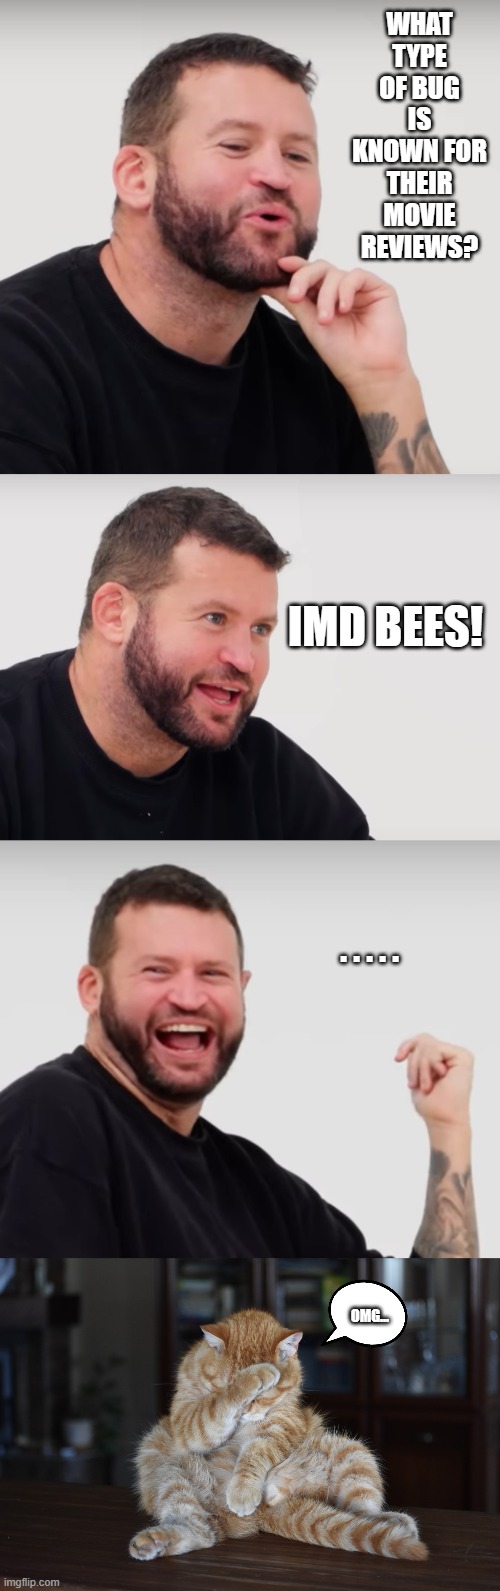 Dad Jokes | WHAT TYPE OF BUG IS KNOWN FOR THEIR MOVIE REVIEWS? IMD BEES! . . . . . OMG... | image tagged in dad joke meme | made w/ Imgflip meme maker